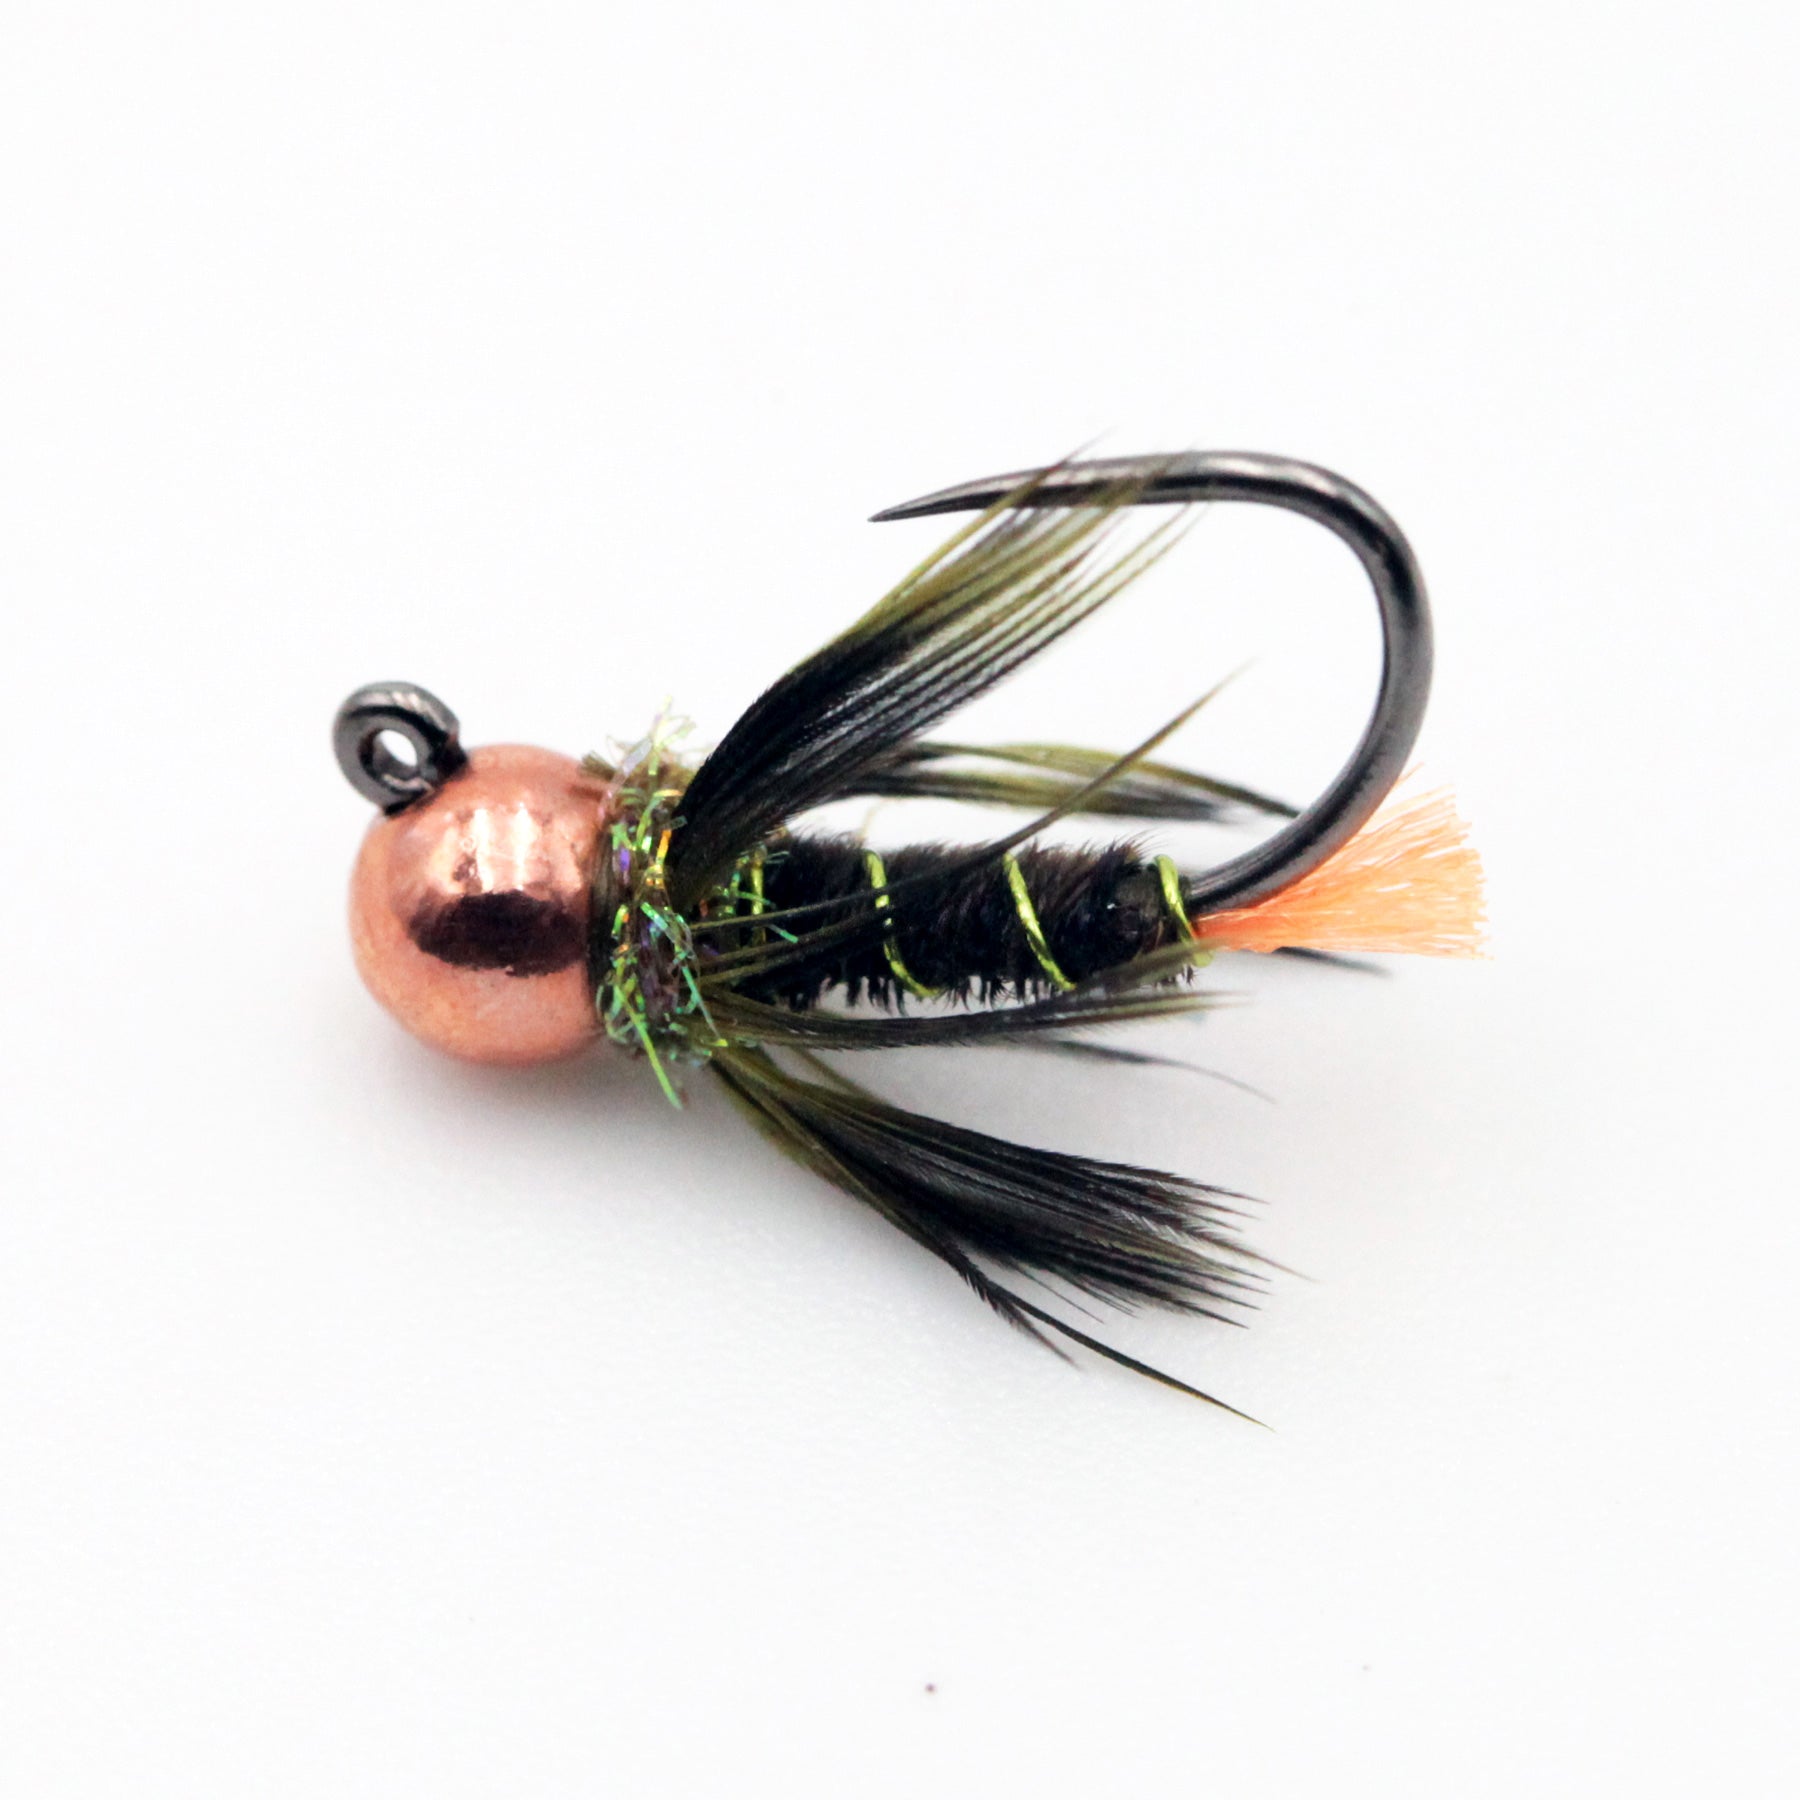 The Fly Fiend’s Hot Tag Pheasant (3 Pack)